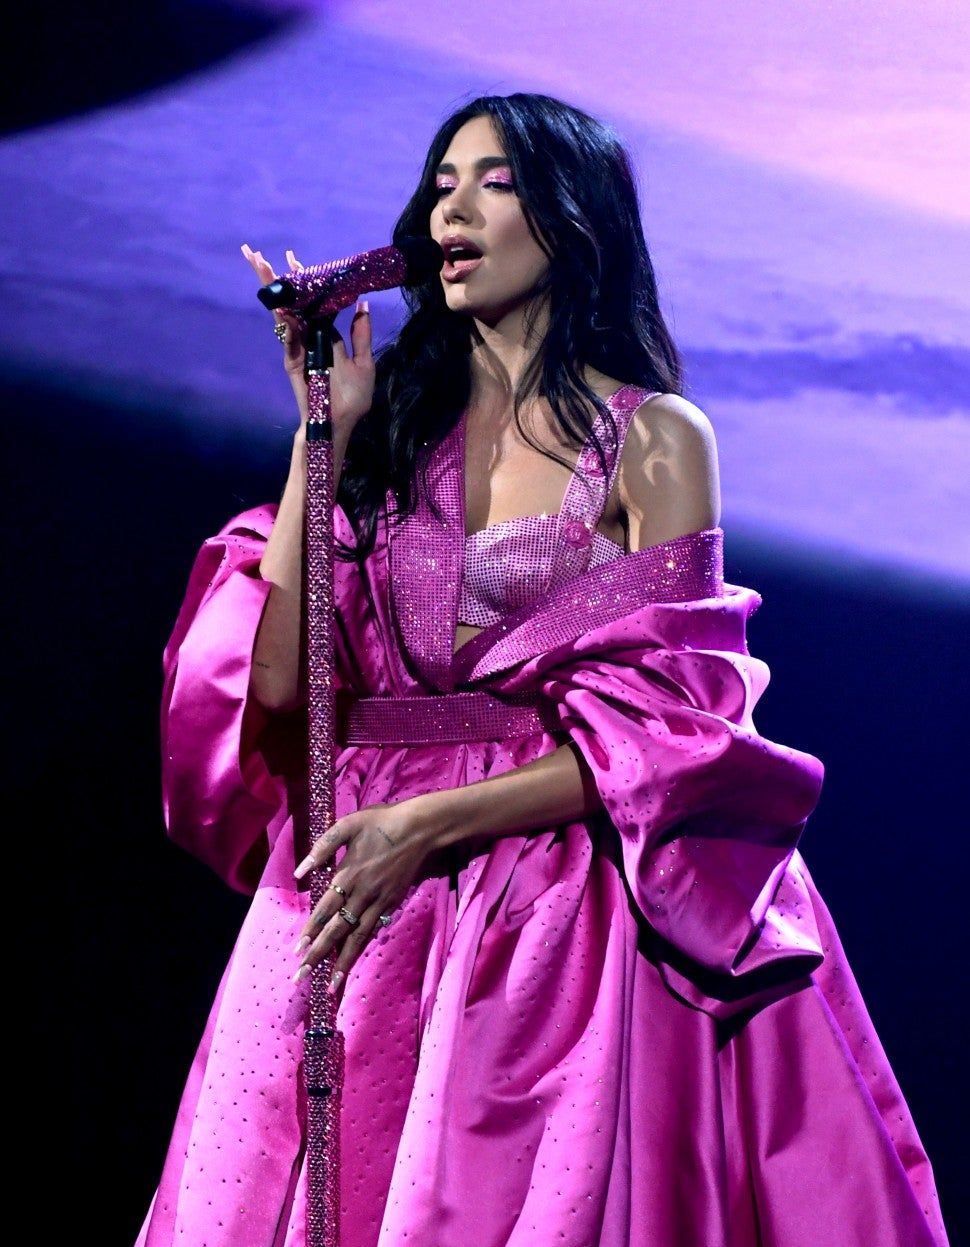 Dua Lipa Sparkles With 'Levitating' Performance Featuring DaBaby at 2021 GRAMMY Awards